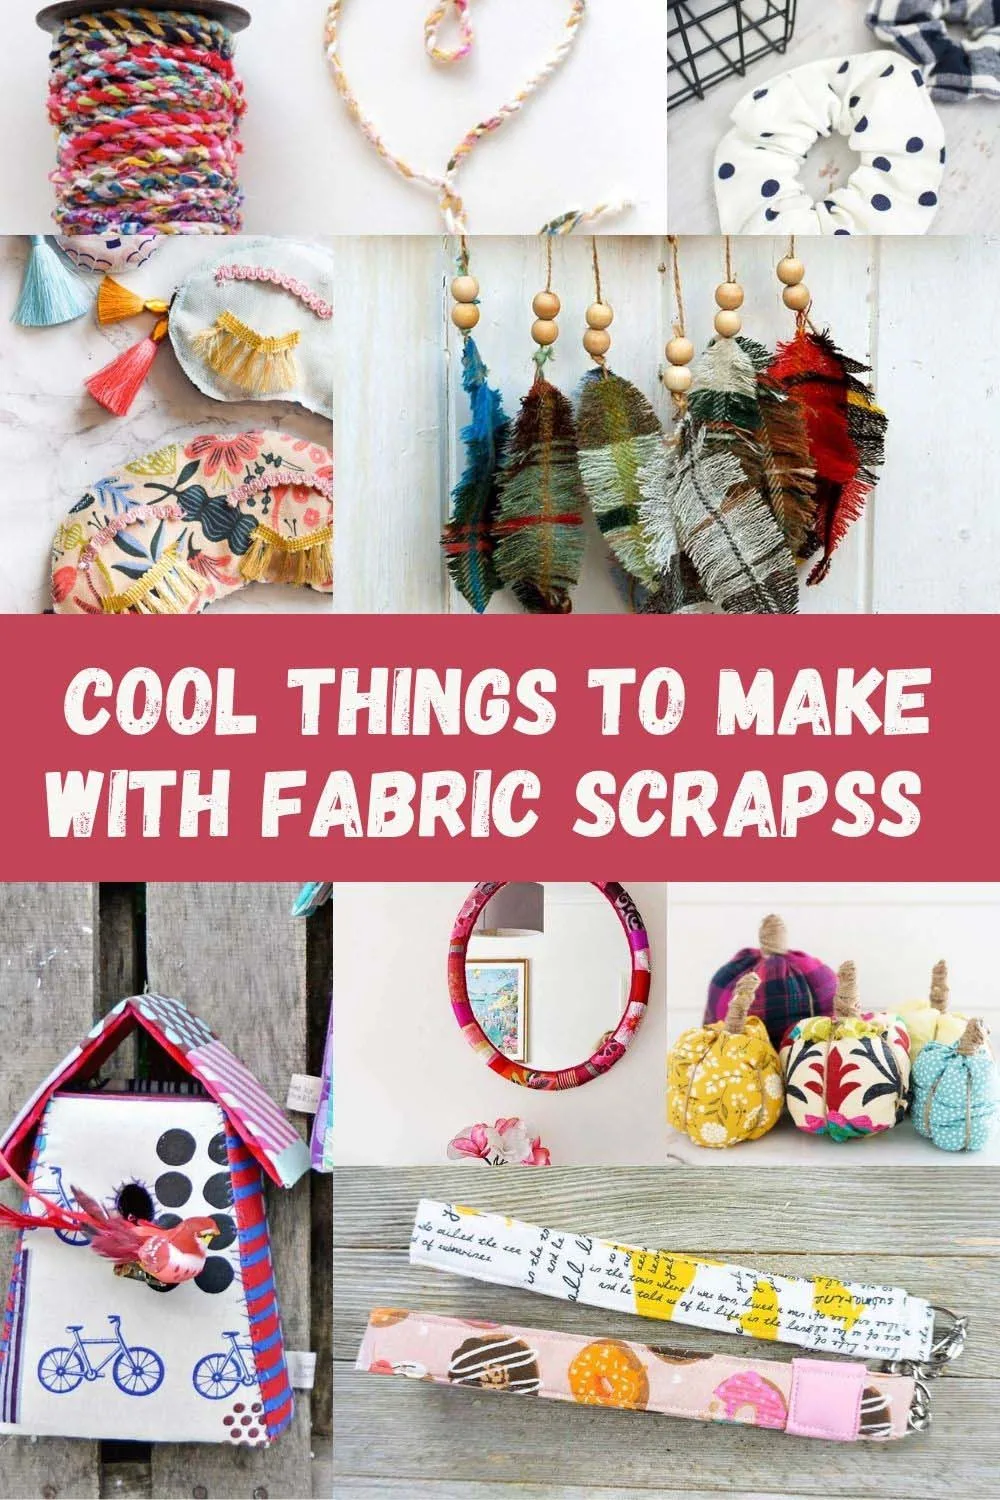 4 IDEAS DENIM PATCHWORK BAGS TO MAKE, SEWING PROJECTS FOR SCRAP FABRIC